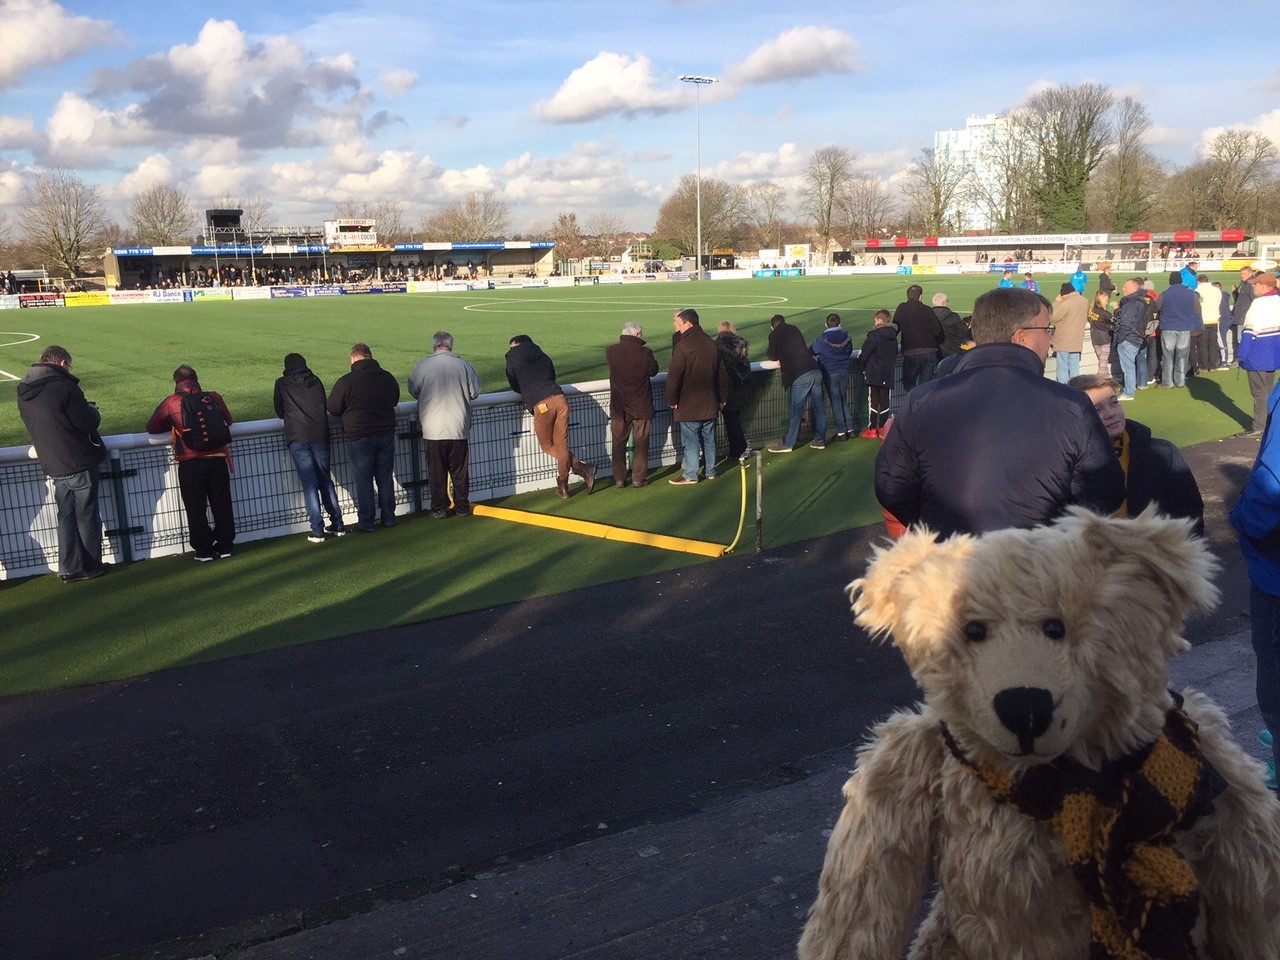 Sutton United: 849 Supporters here.